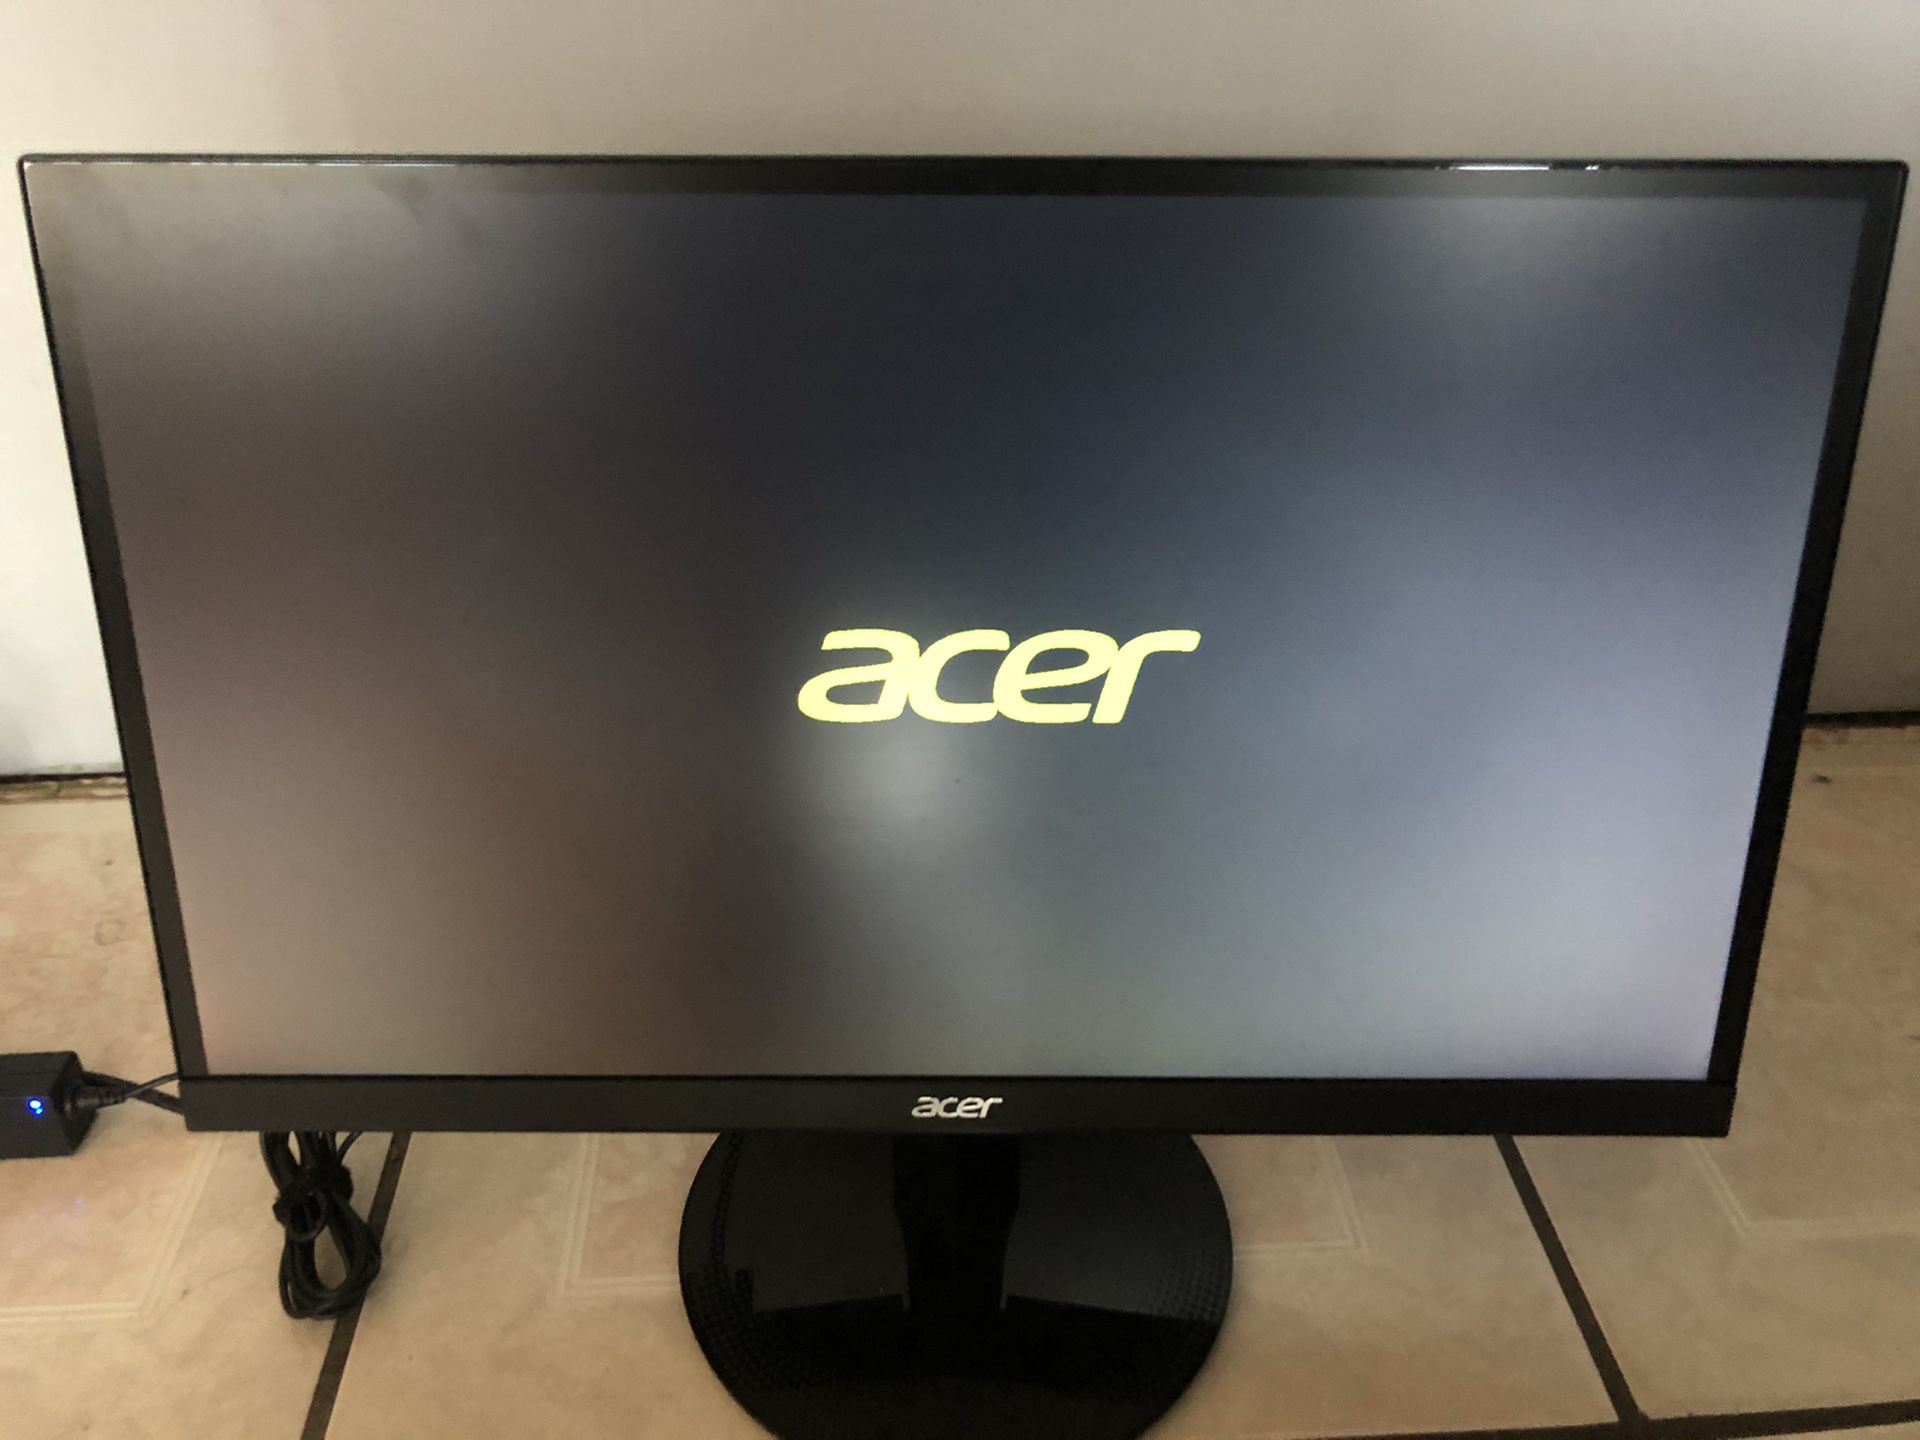 Acer 23” thin wide screen computer monitor